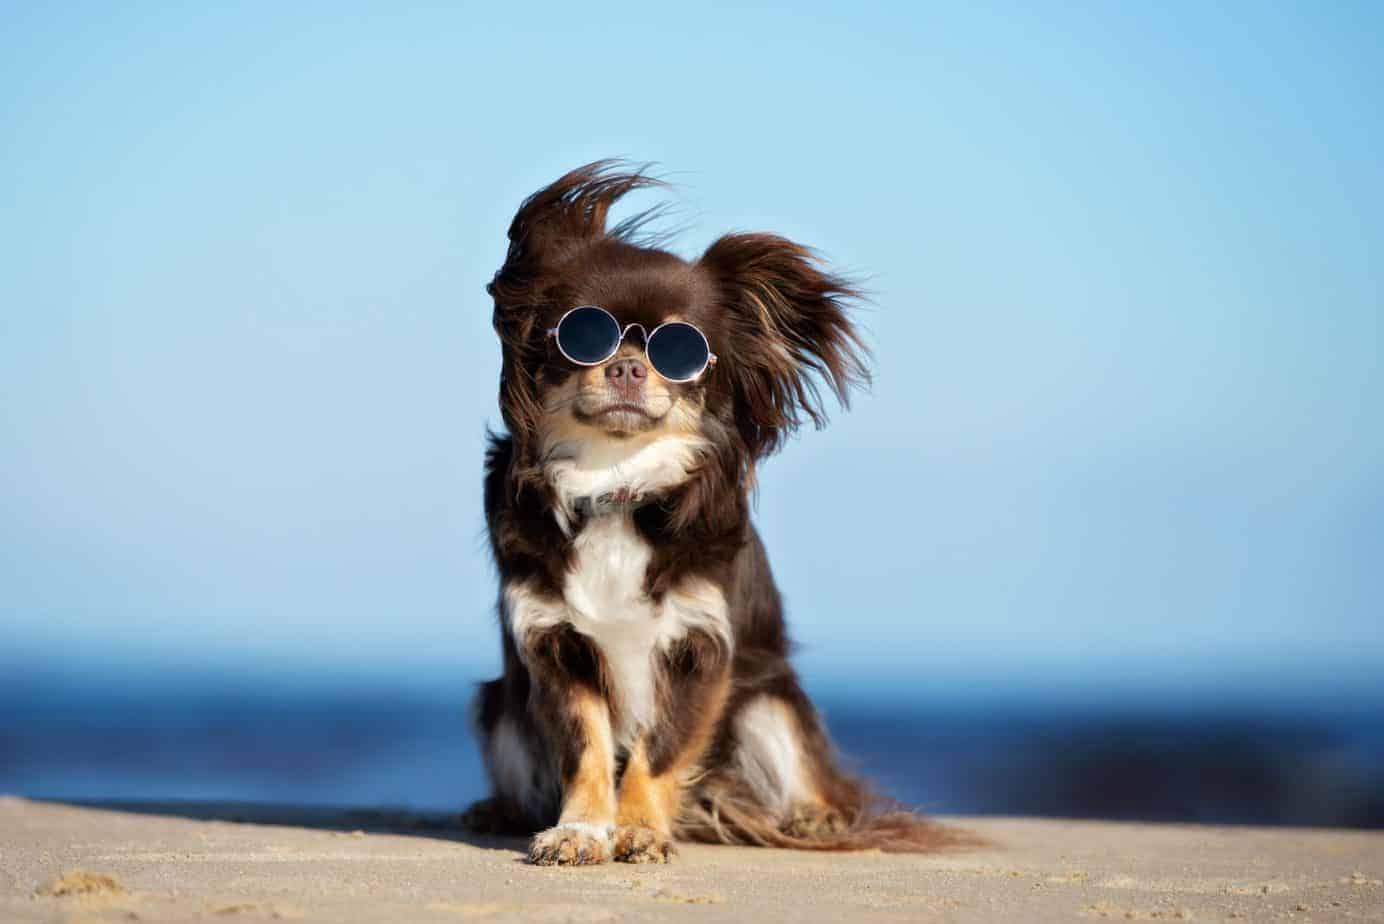 Happy chihuahua wearing sunglasses sits on the beach.